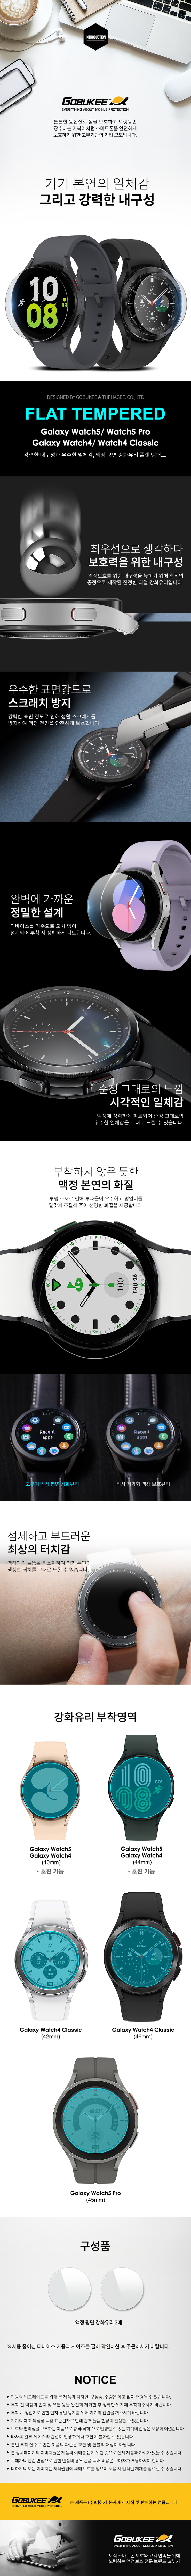 Galaxy%20watch4%20and%20Classic_Glass_Page_Ver12_Smart.jpg